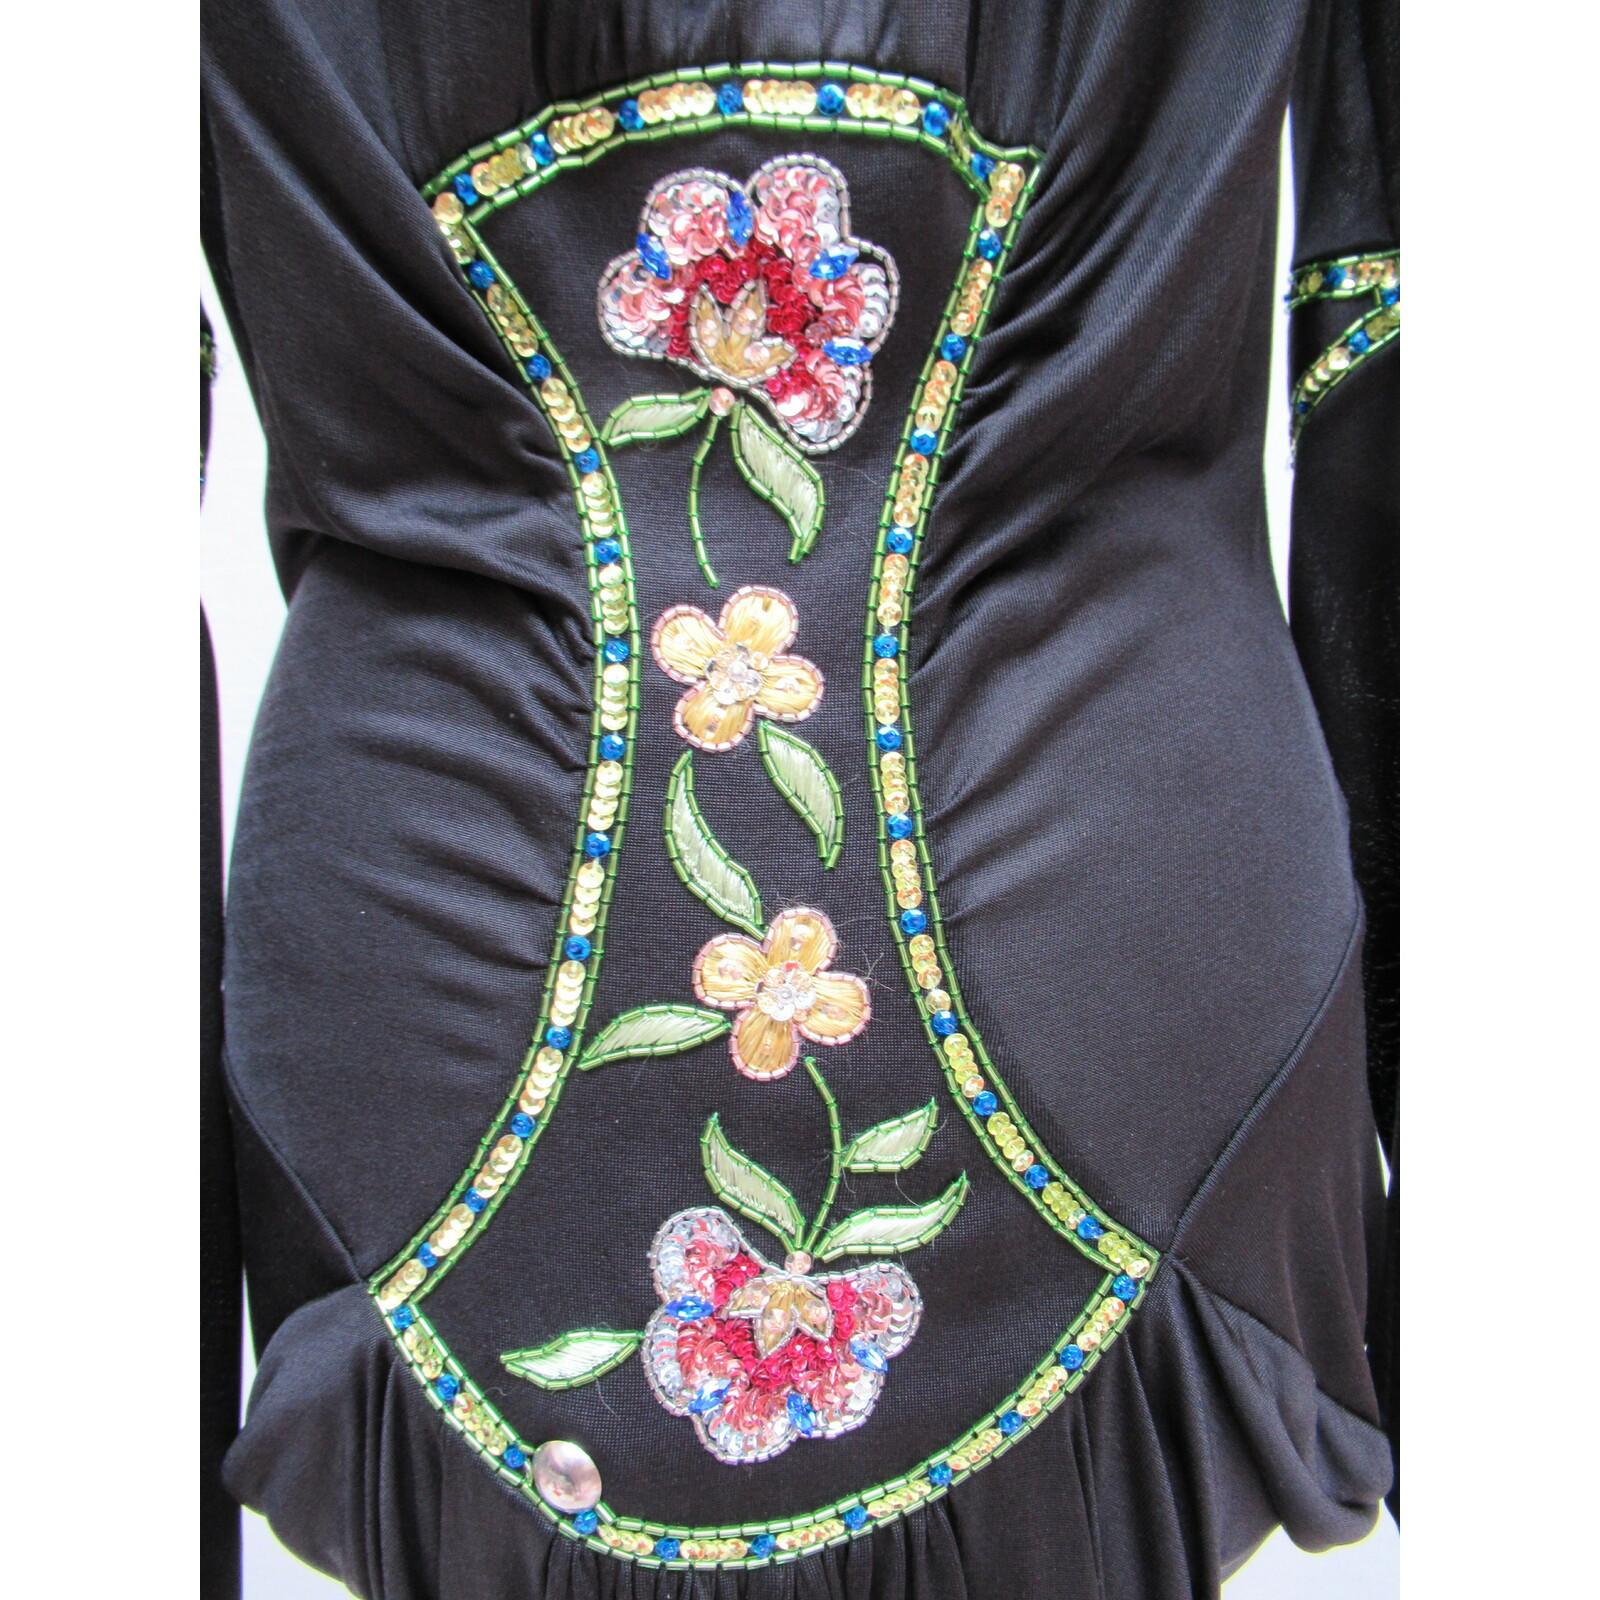 Women's S/S 02 Look#37 Vintage John Galliano for Christian Dior Embellished Silk Dress 